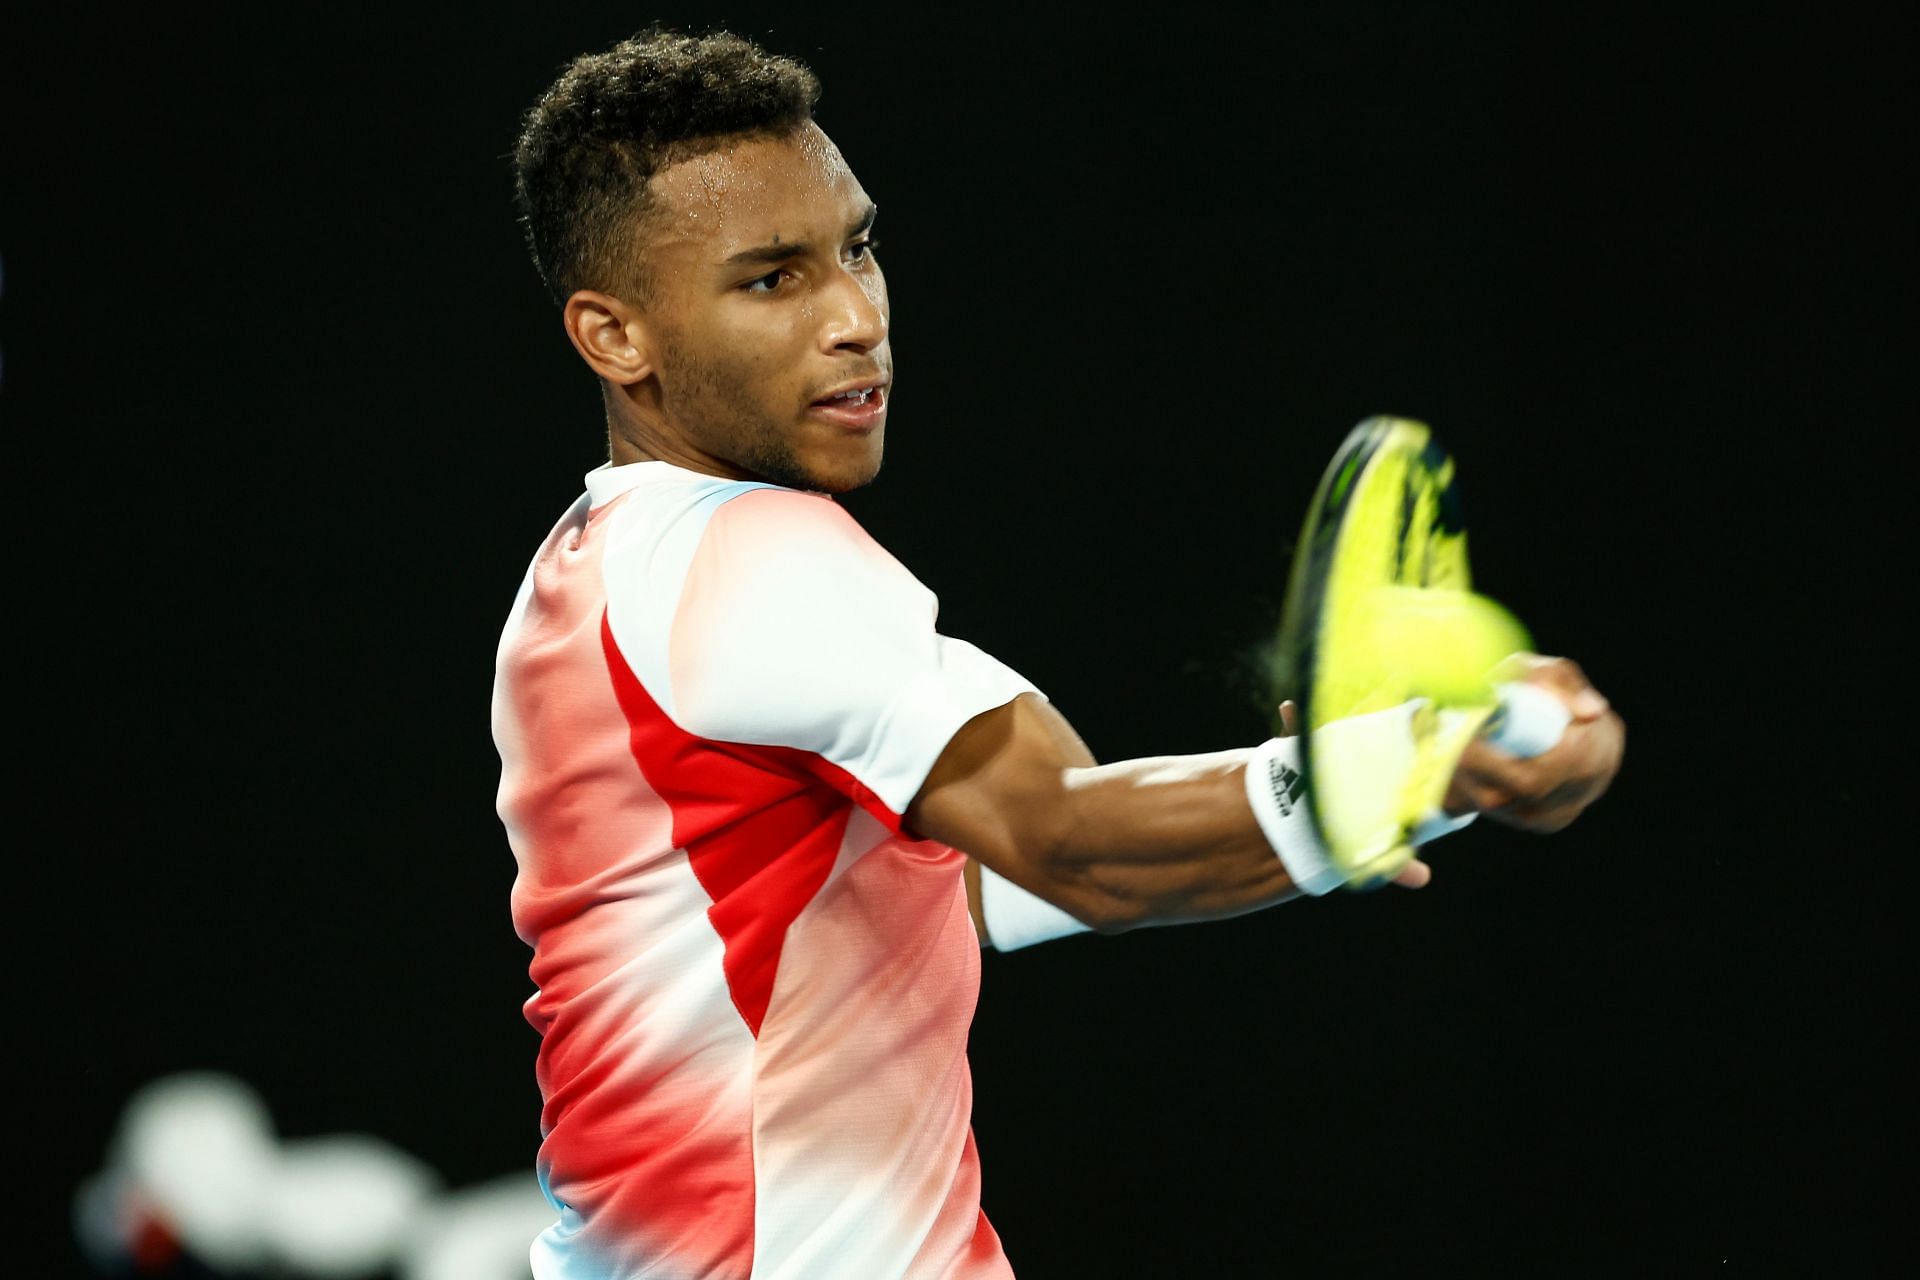 Felix Auger-Aliassime is slated to face Medvedev in the last eight.